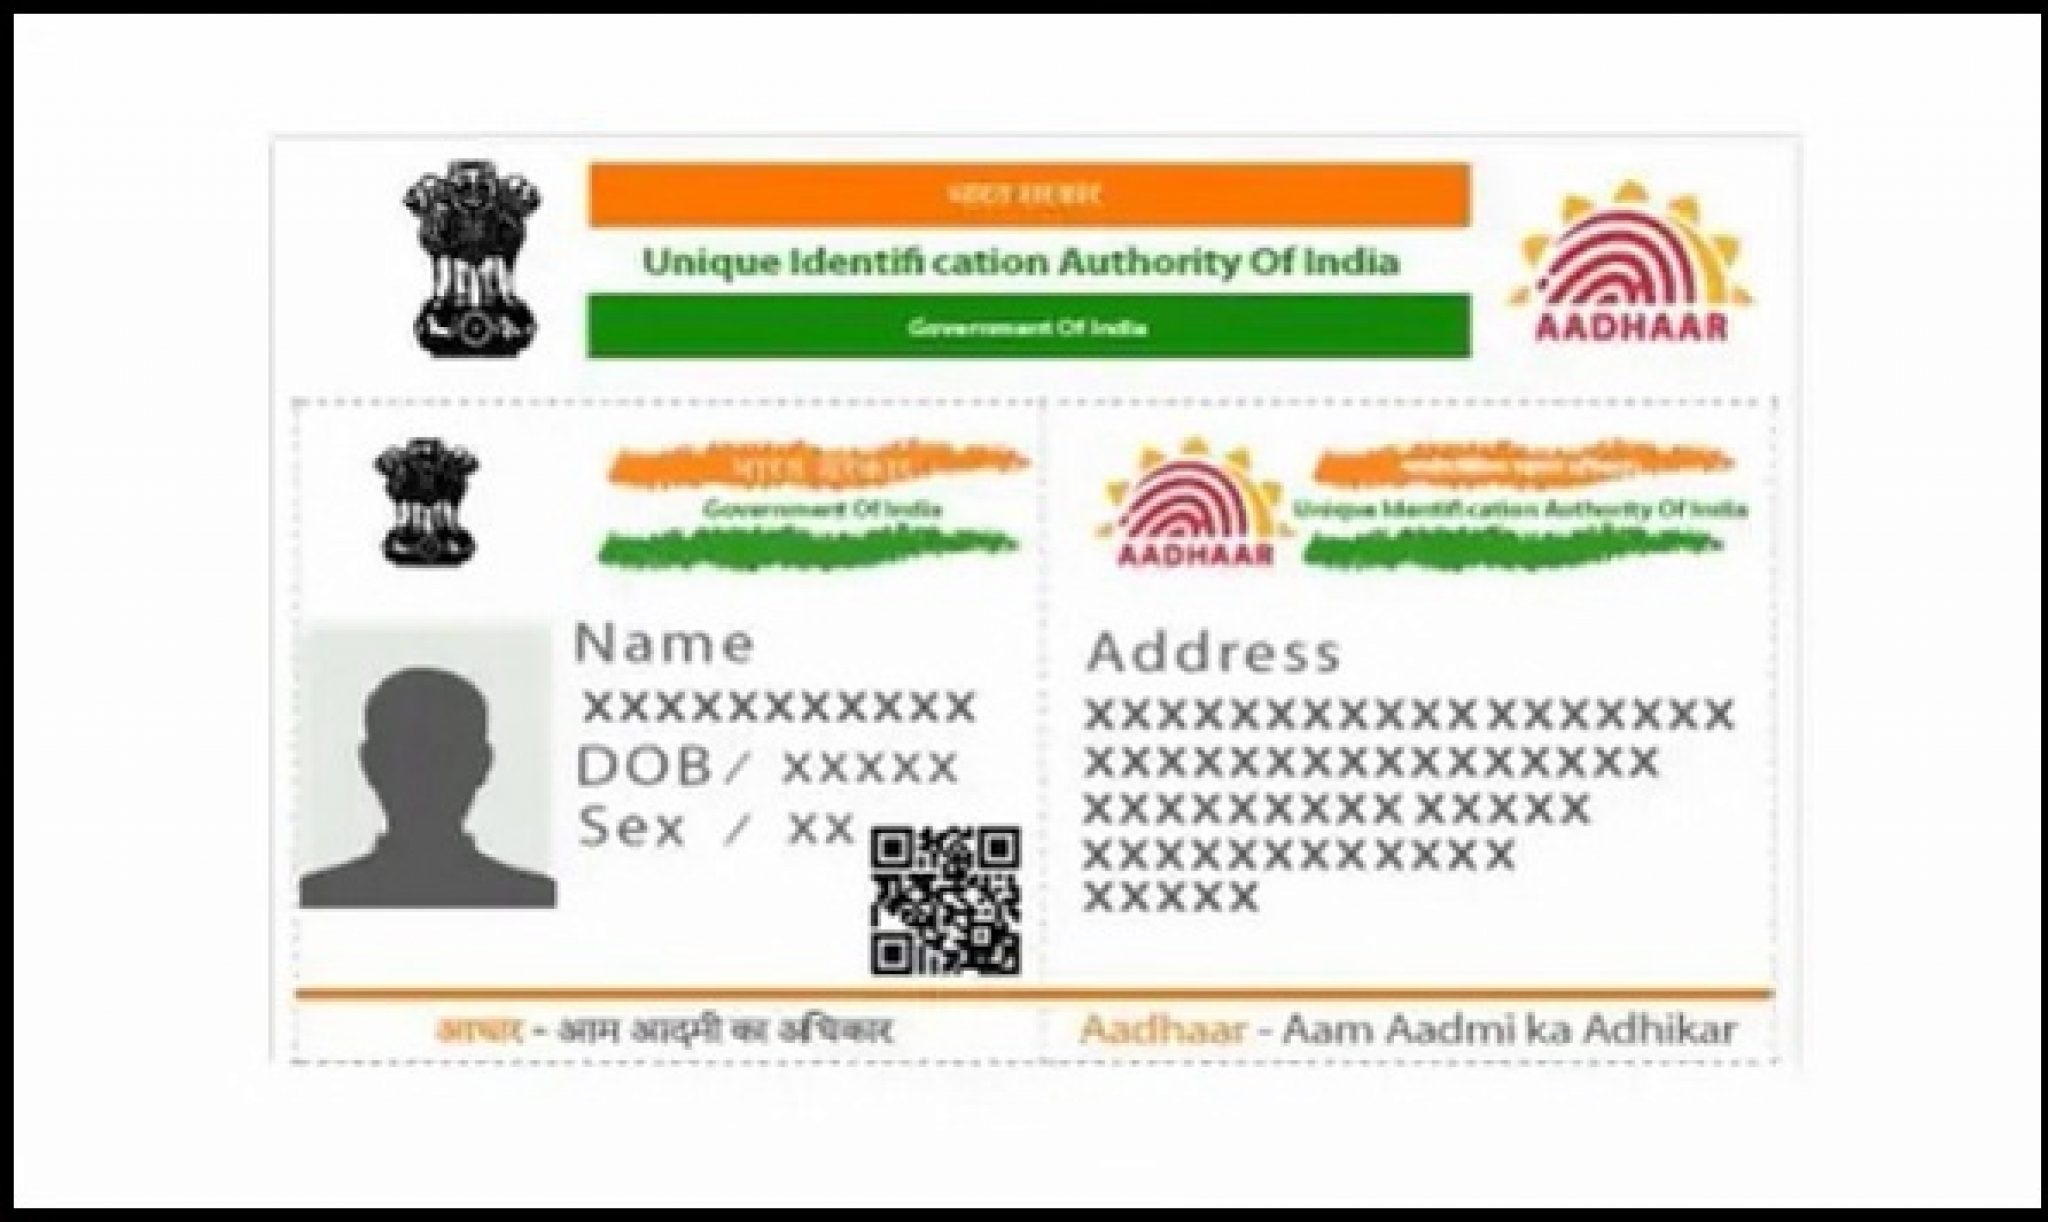 how to change photograph in aadhar card online